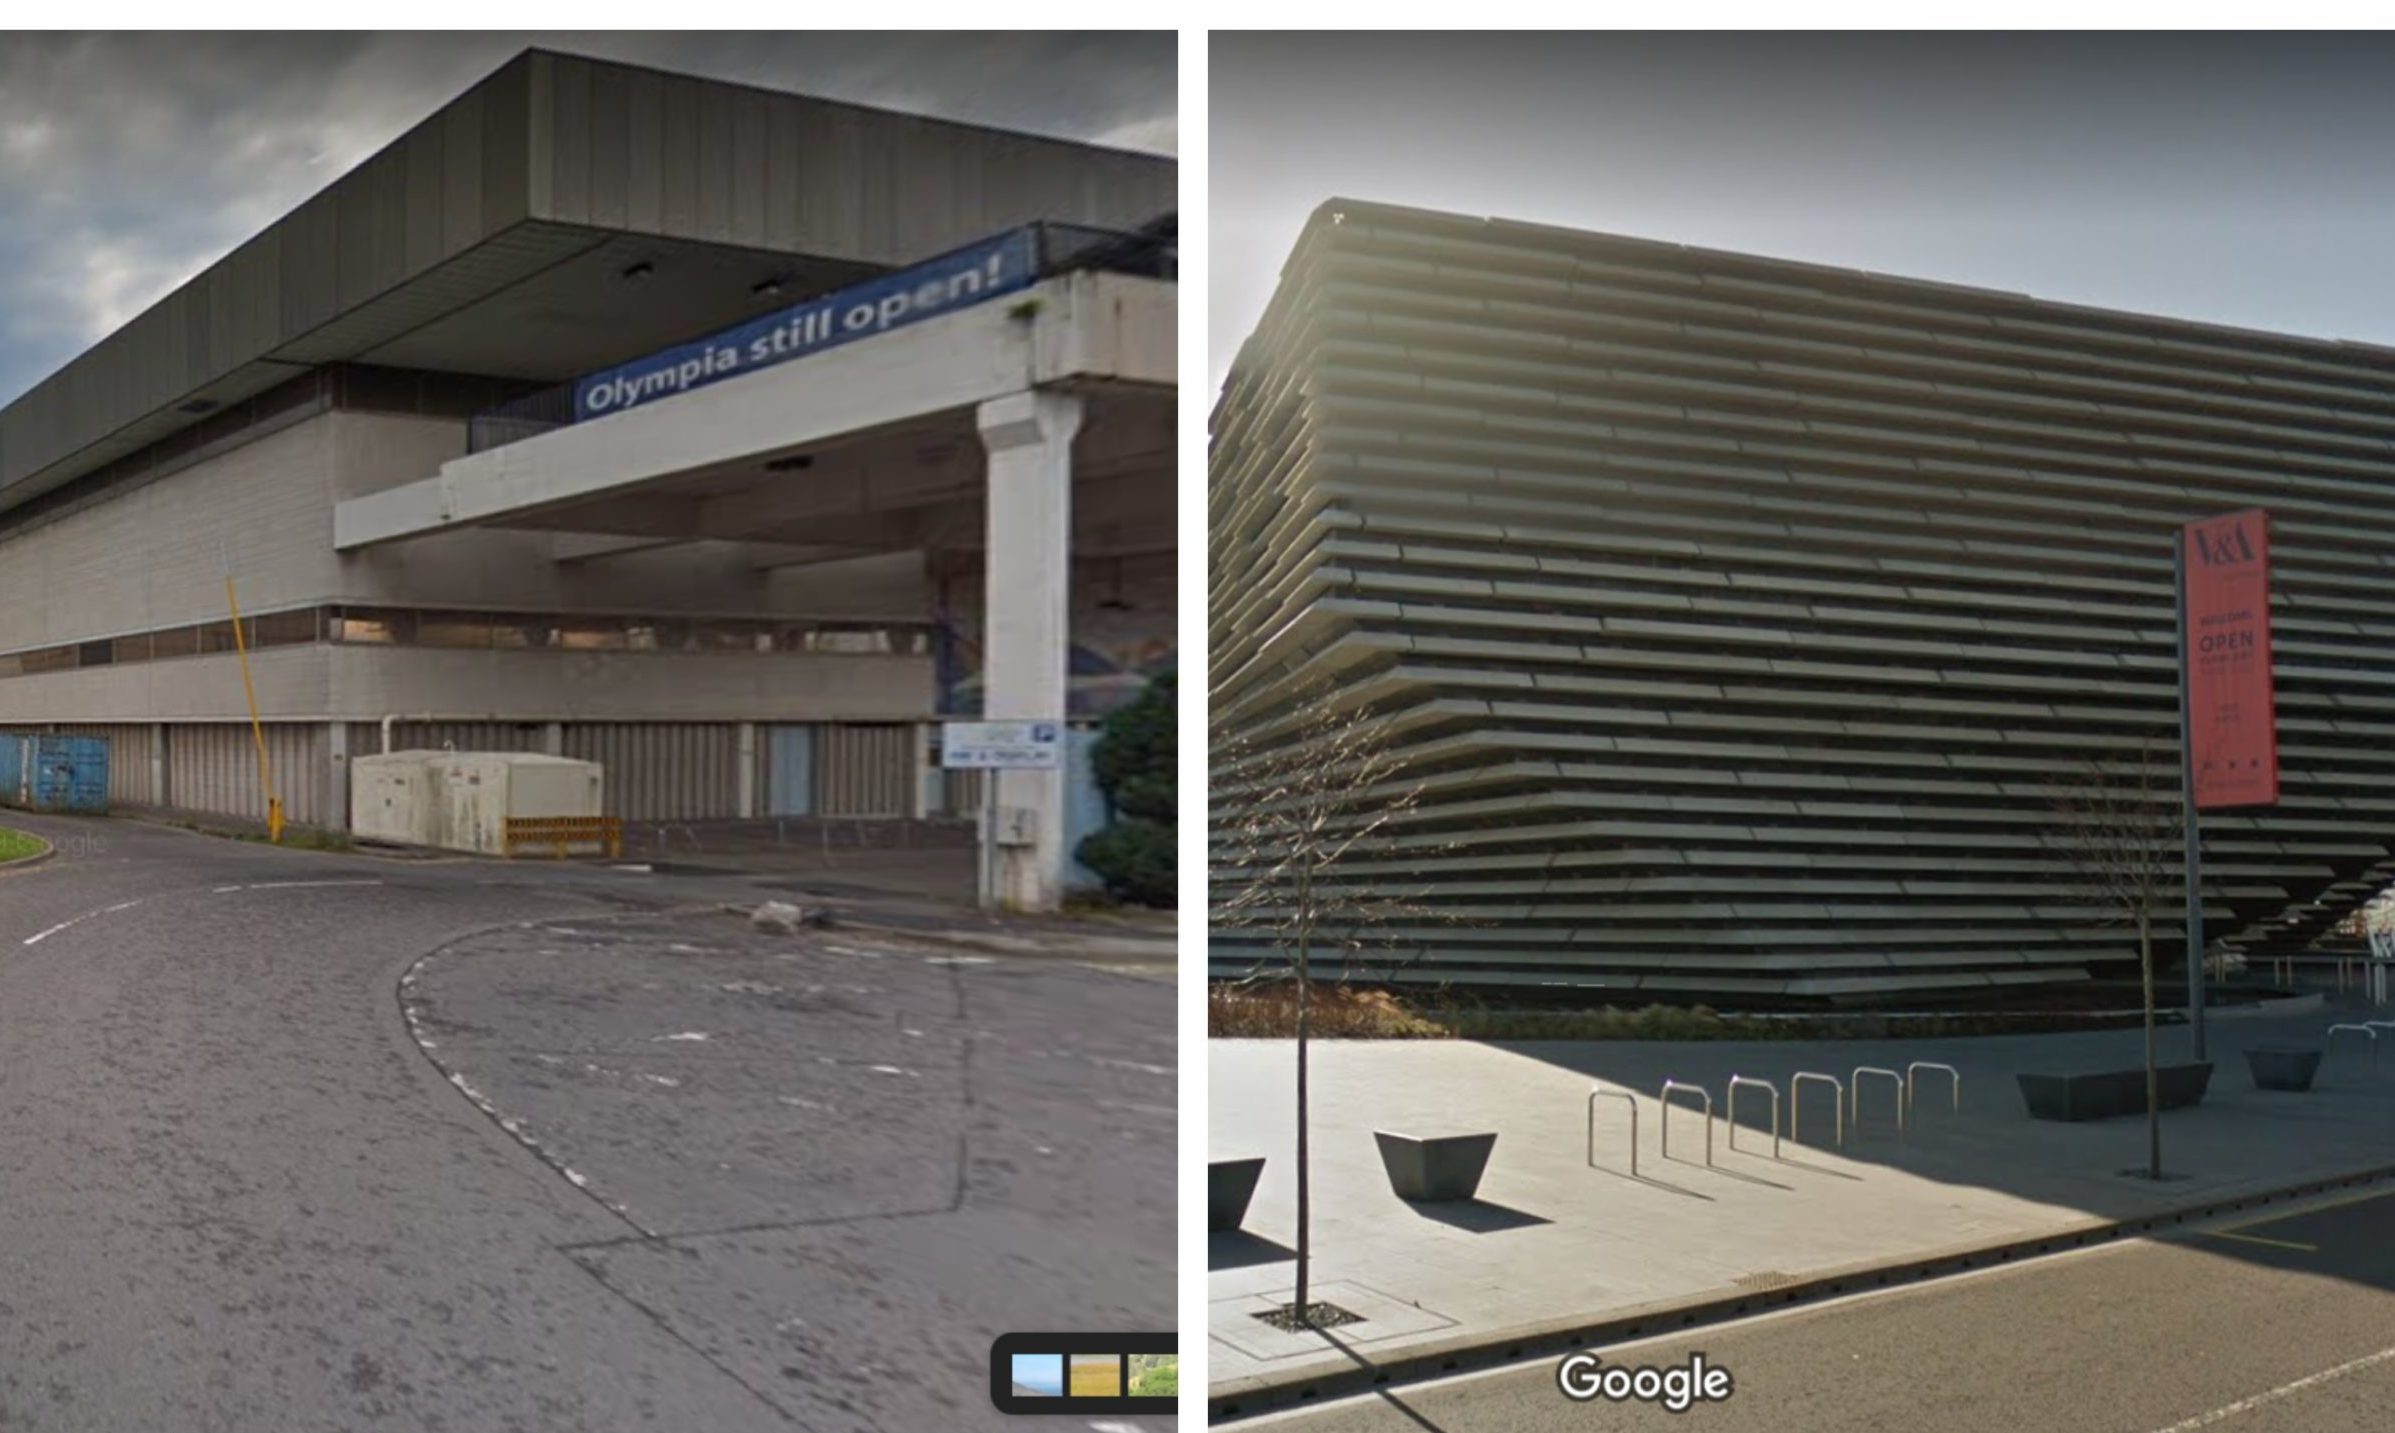 Users are shown Street View images of the now demolished Olympia Leisure Centre from many years ago, left, mixed in with new images such as that of V&A Dundee, right, which replaced it